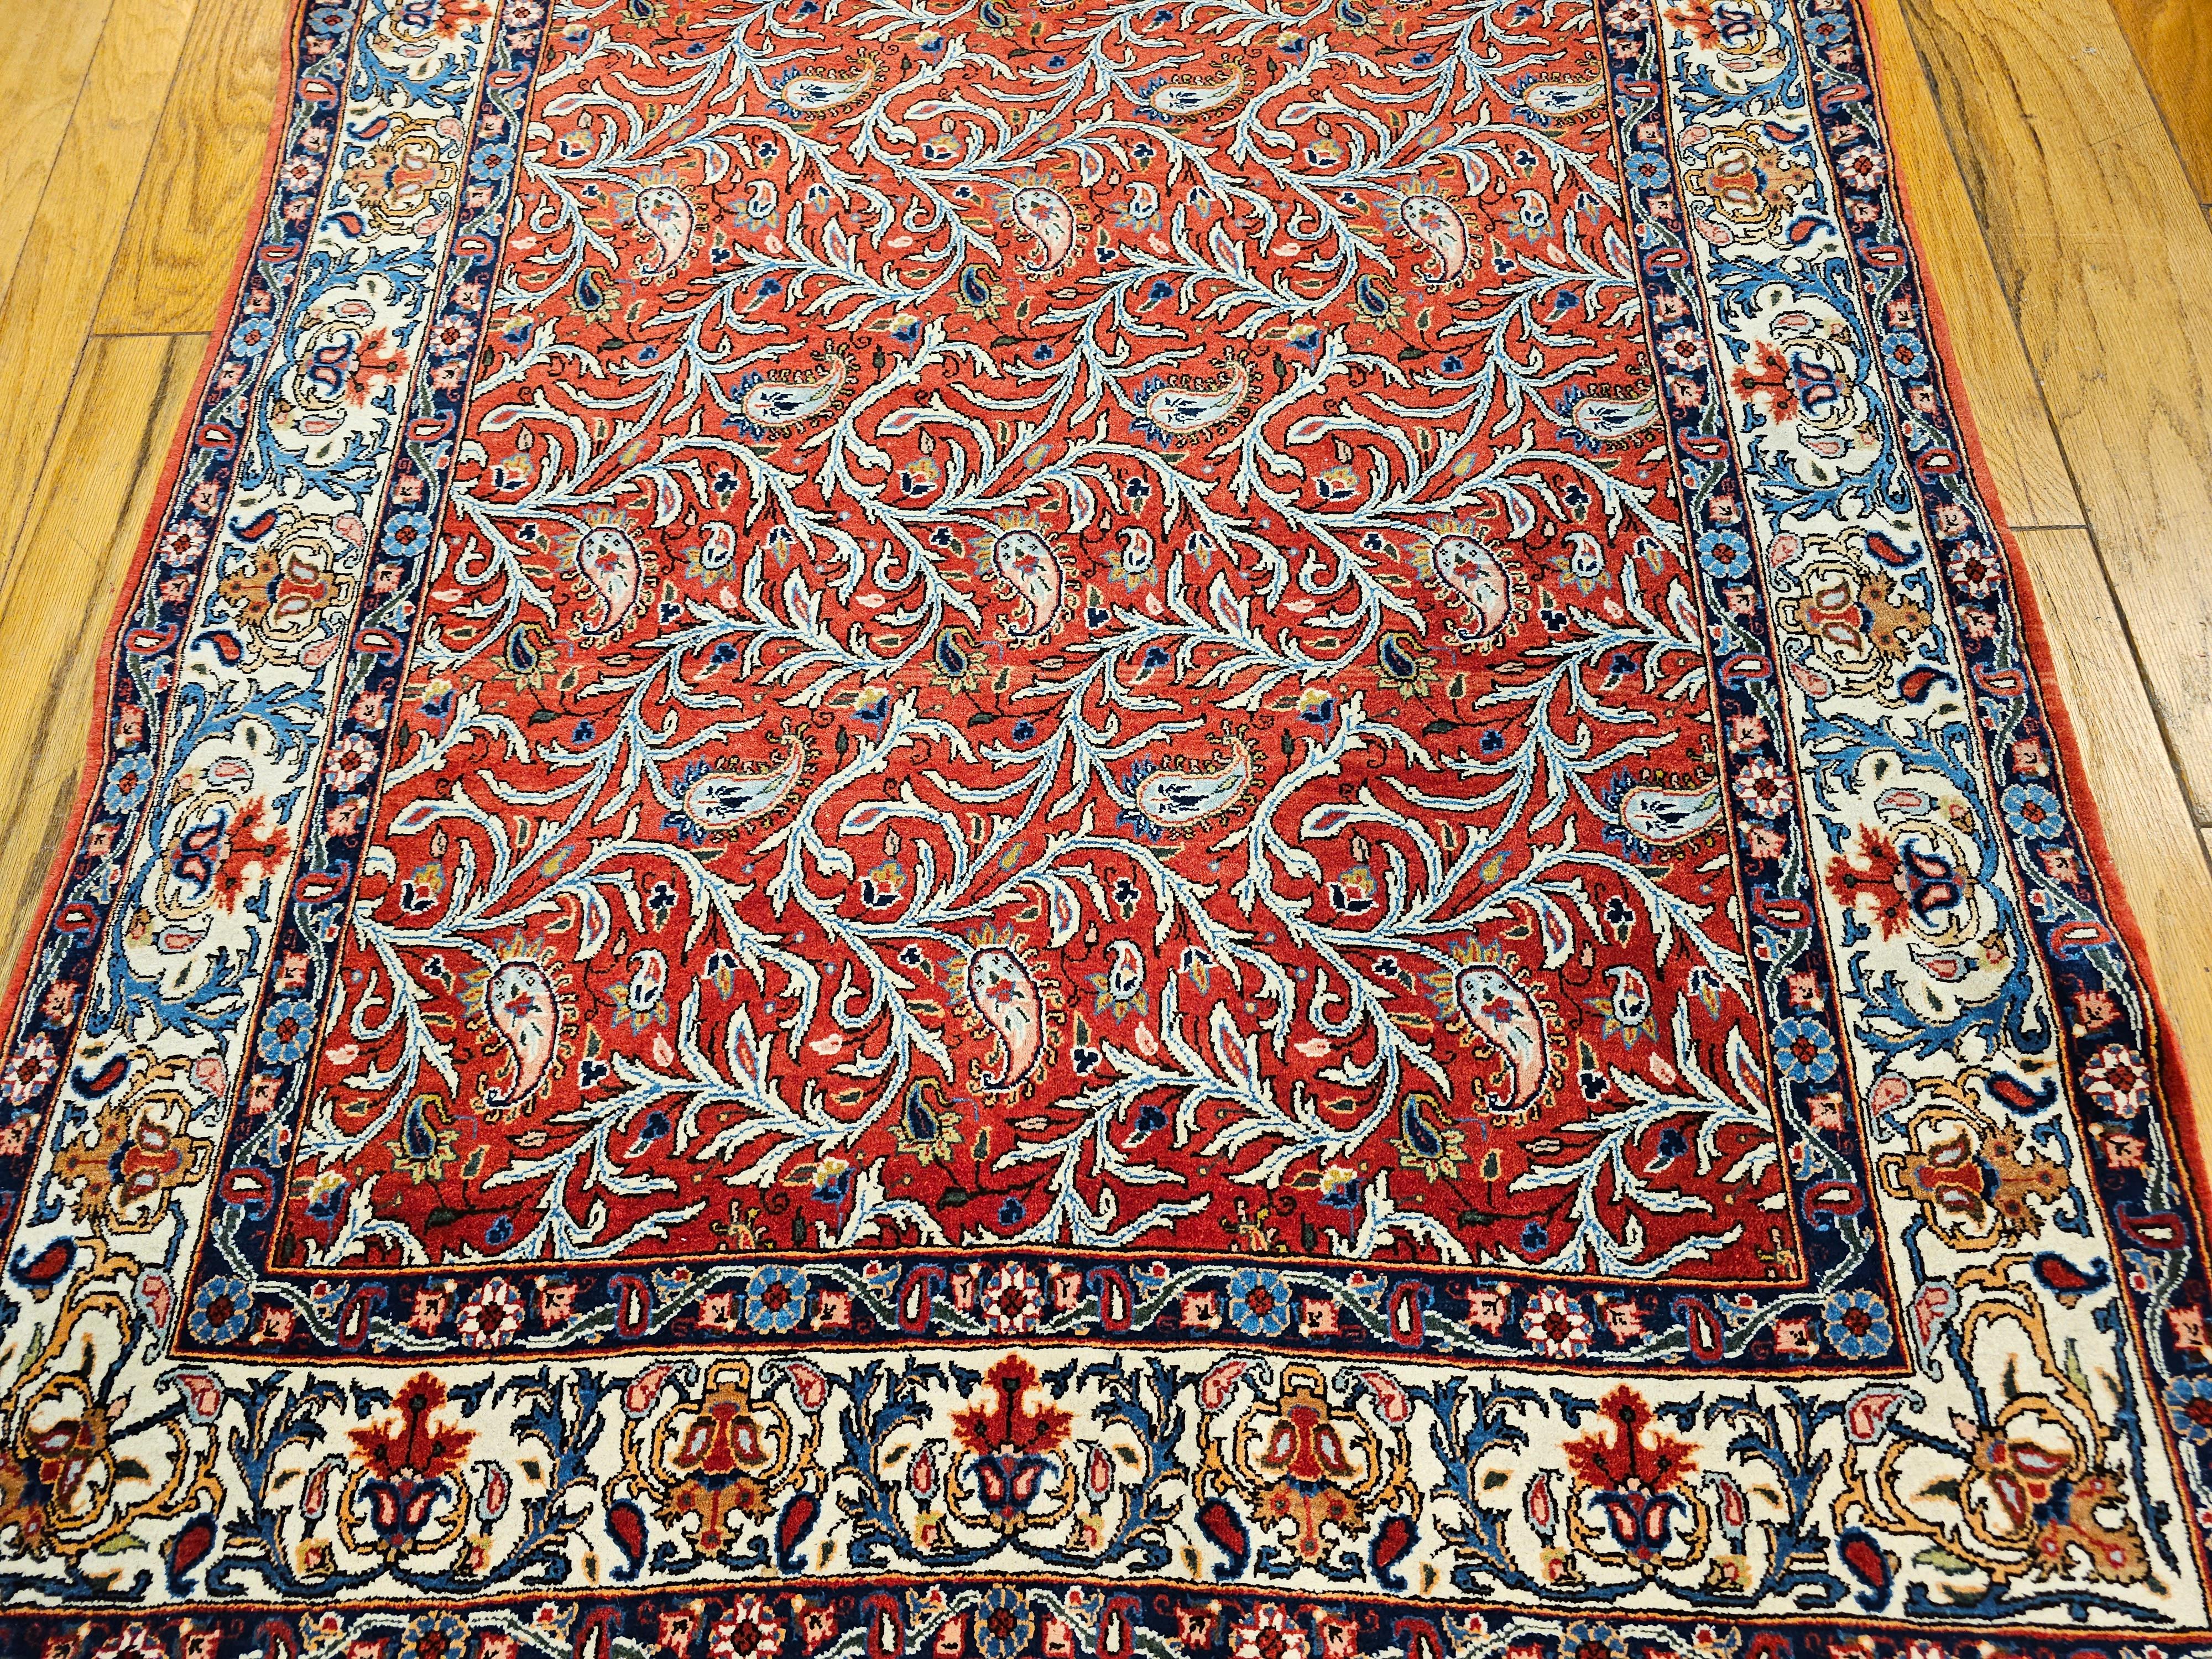 Vintage Persian Qum Rug in Allover Paisleys Pattern in Brick Red, Ivory, Blue In Good Condition For Sale In Barrington, IL